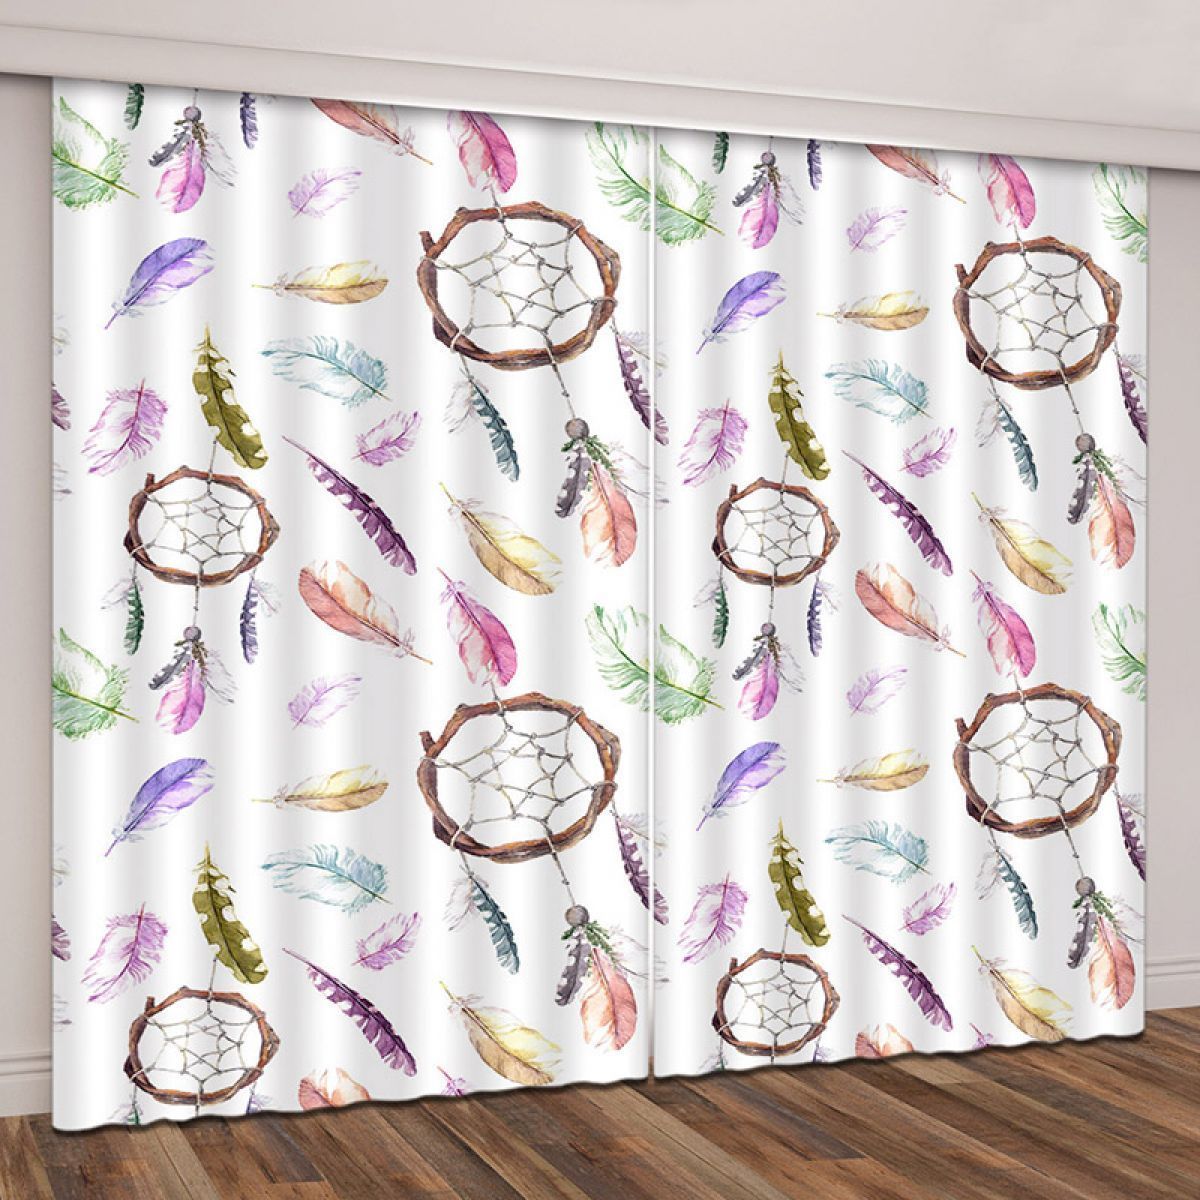 3d dreamcatcher with feather pattern printed window curtain home decor 1869